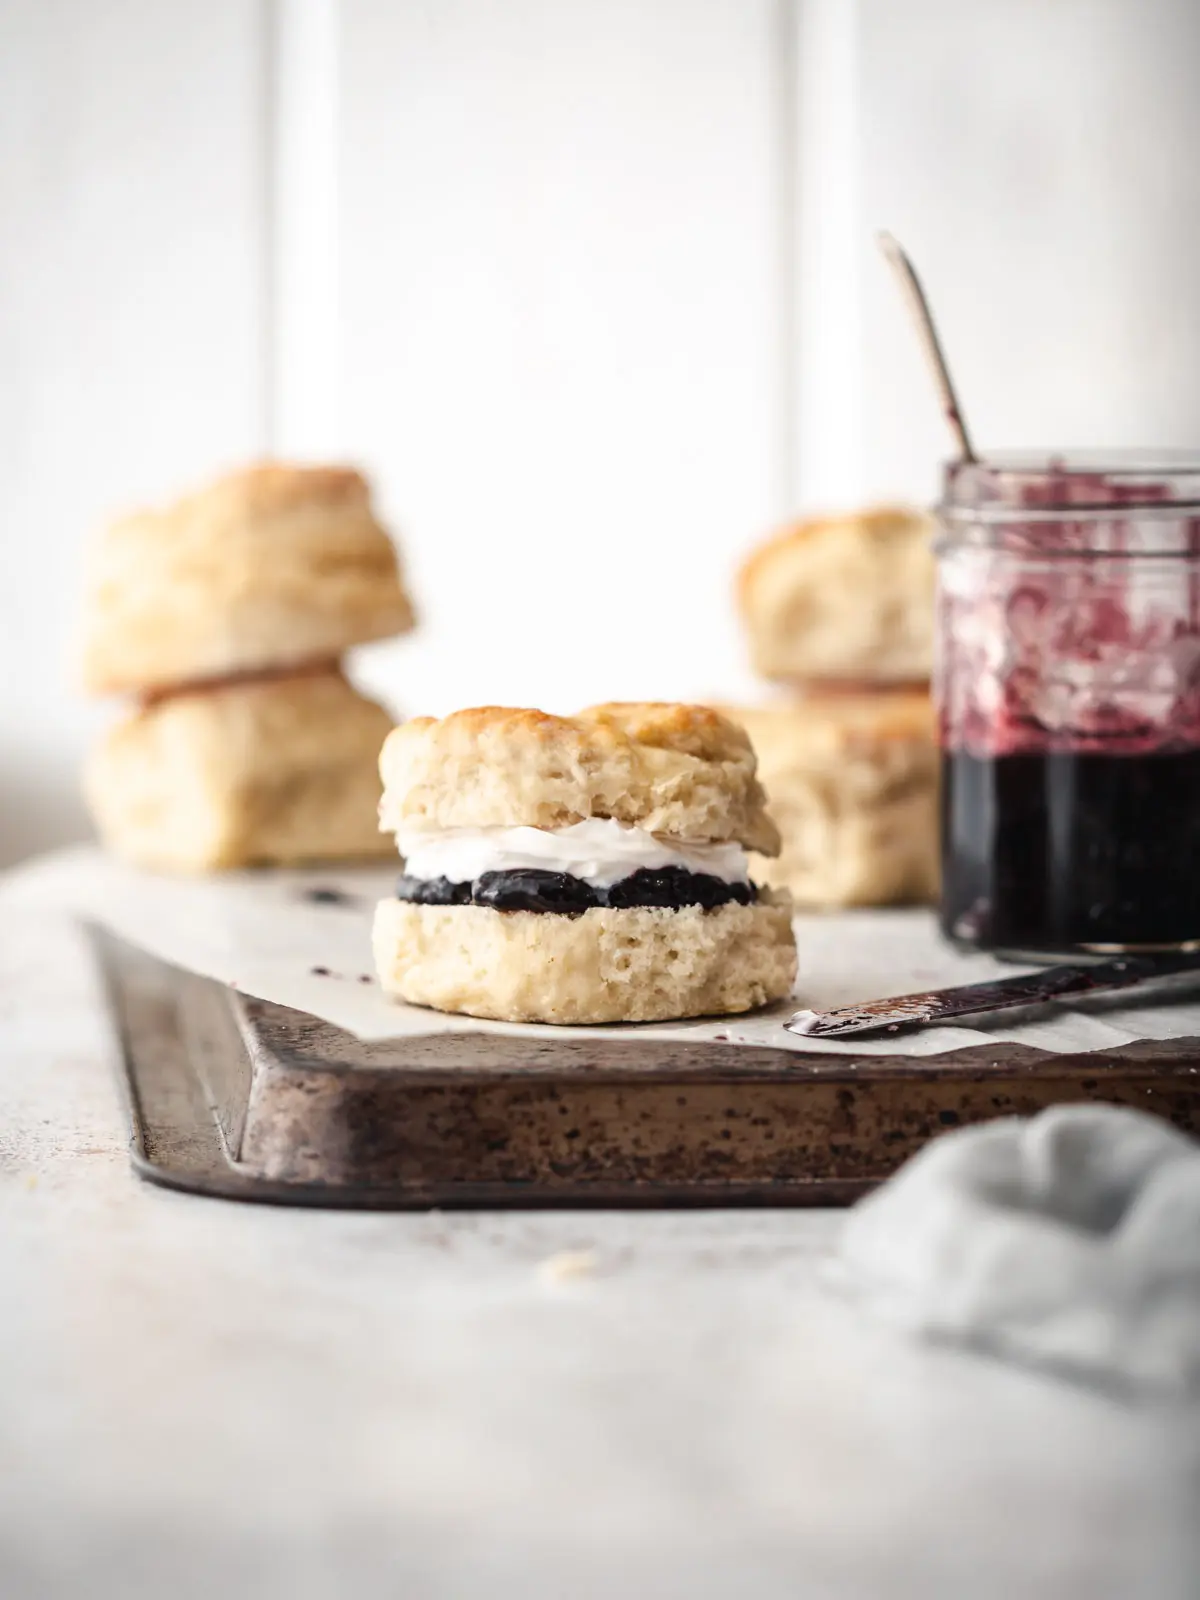 Freshly baked scones with jam and cream.